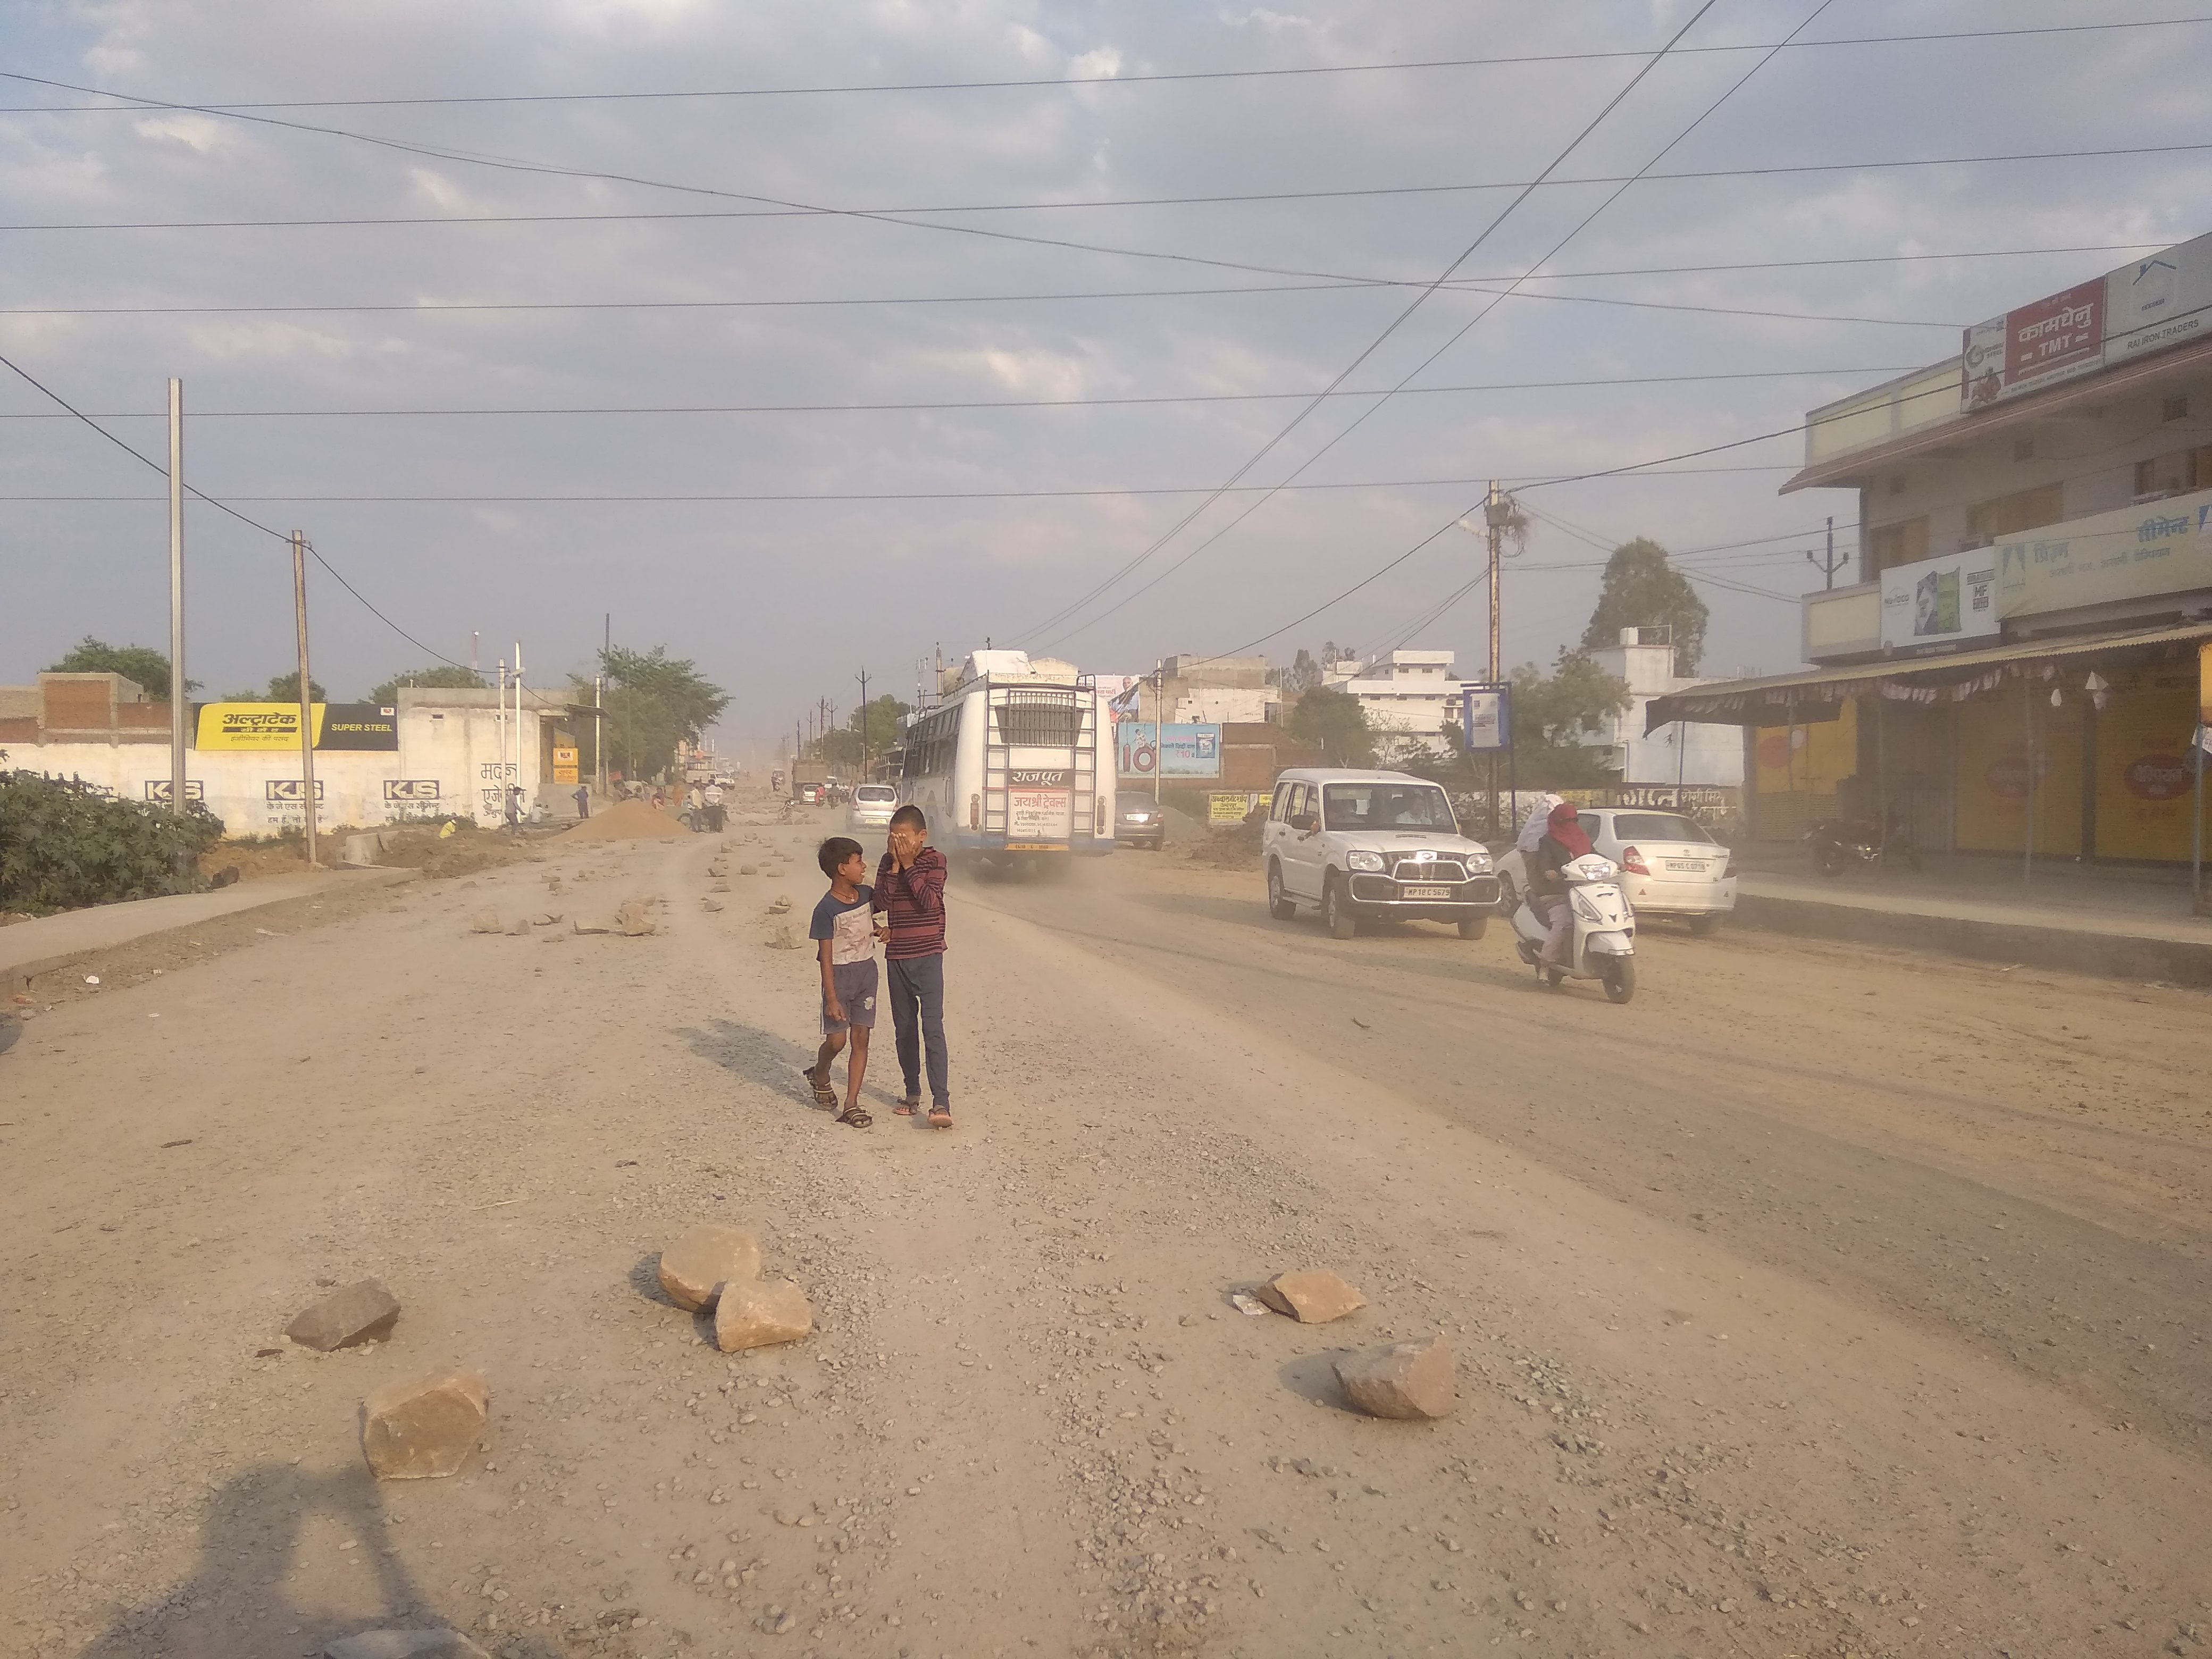 Two months later, a half-a-kilometer long road is incomplete, the urba